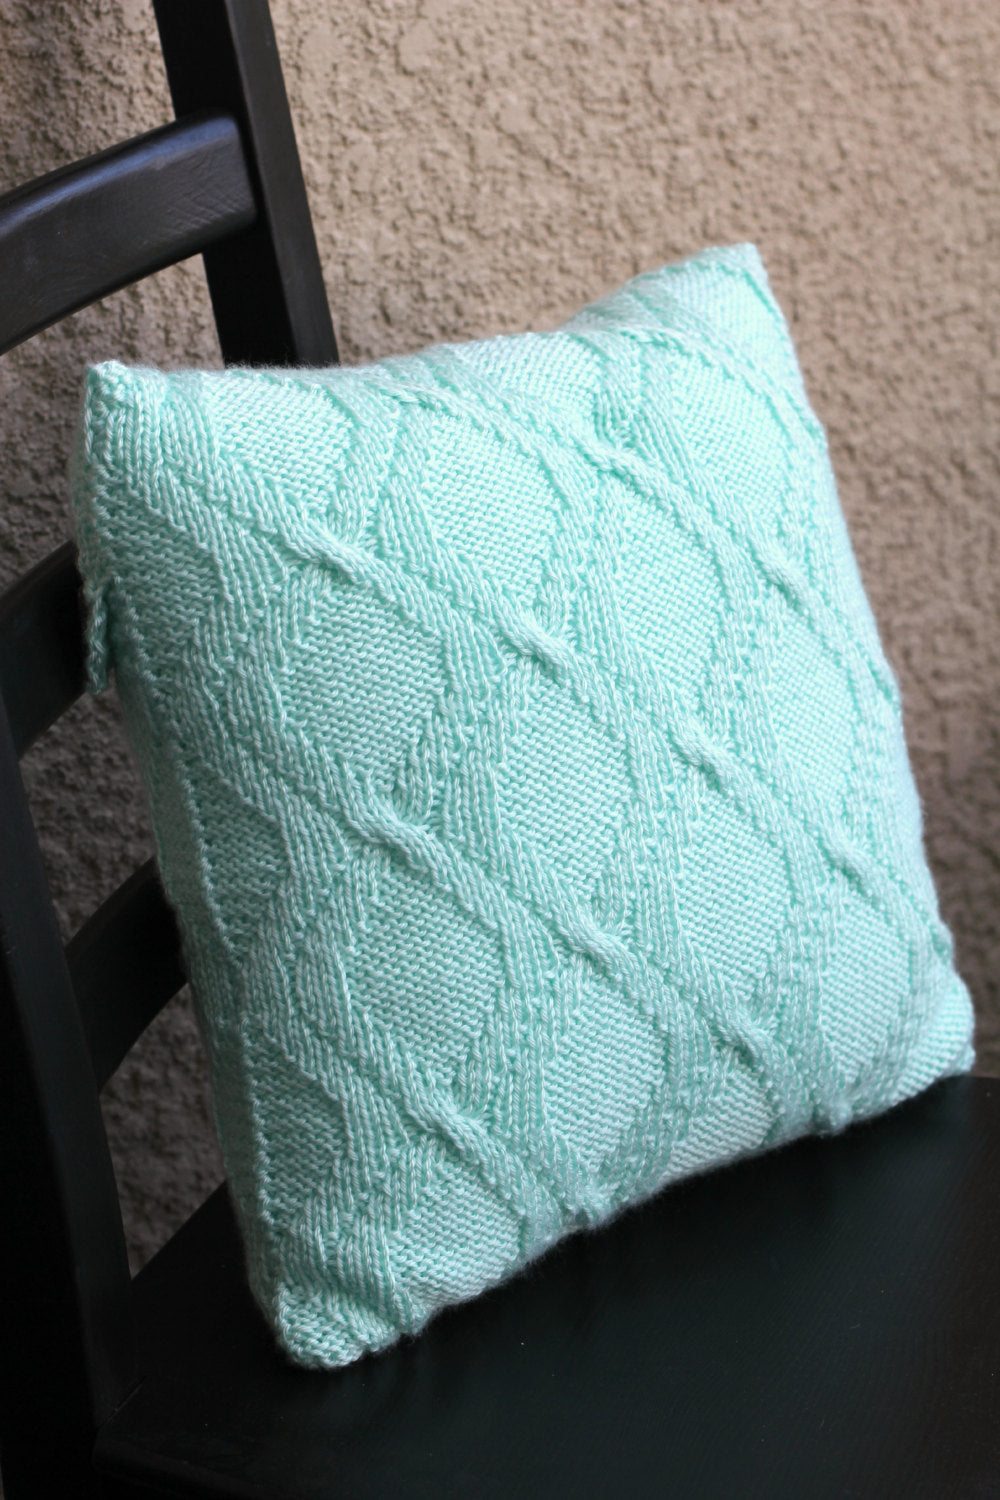 Knit pillow case pattern, knitting pattern, home decor, DIY knitted tutorial - Rombic Pillow cover